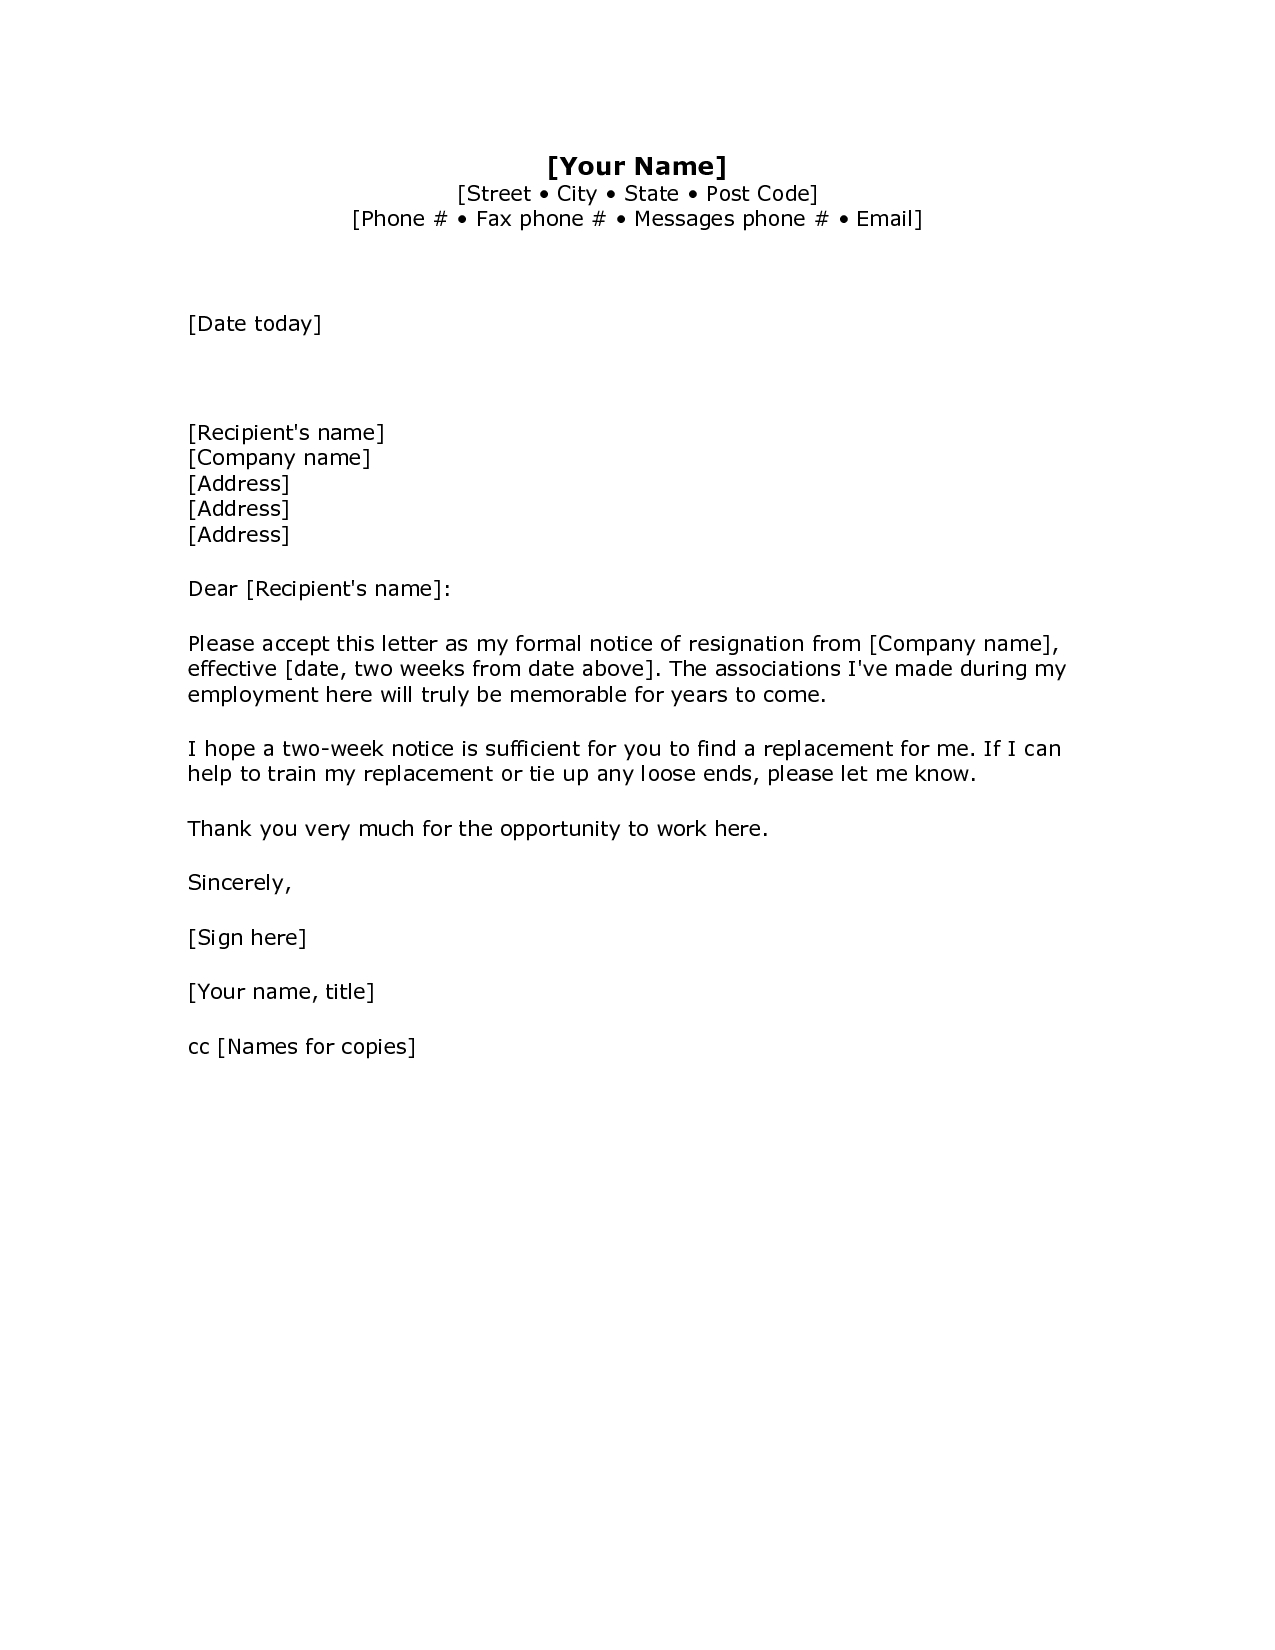 Letter Of Resignation Template Examples Email Title 2 Weeks-Template For 2 Weeks